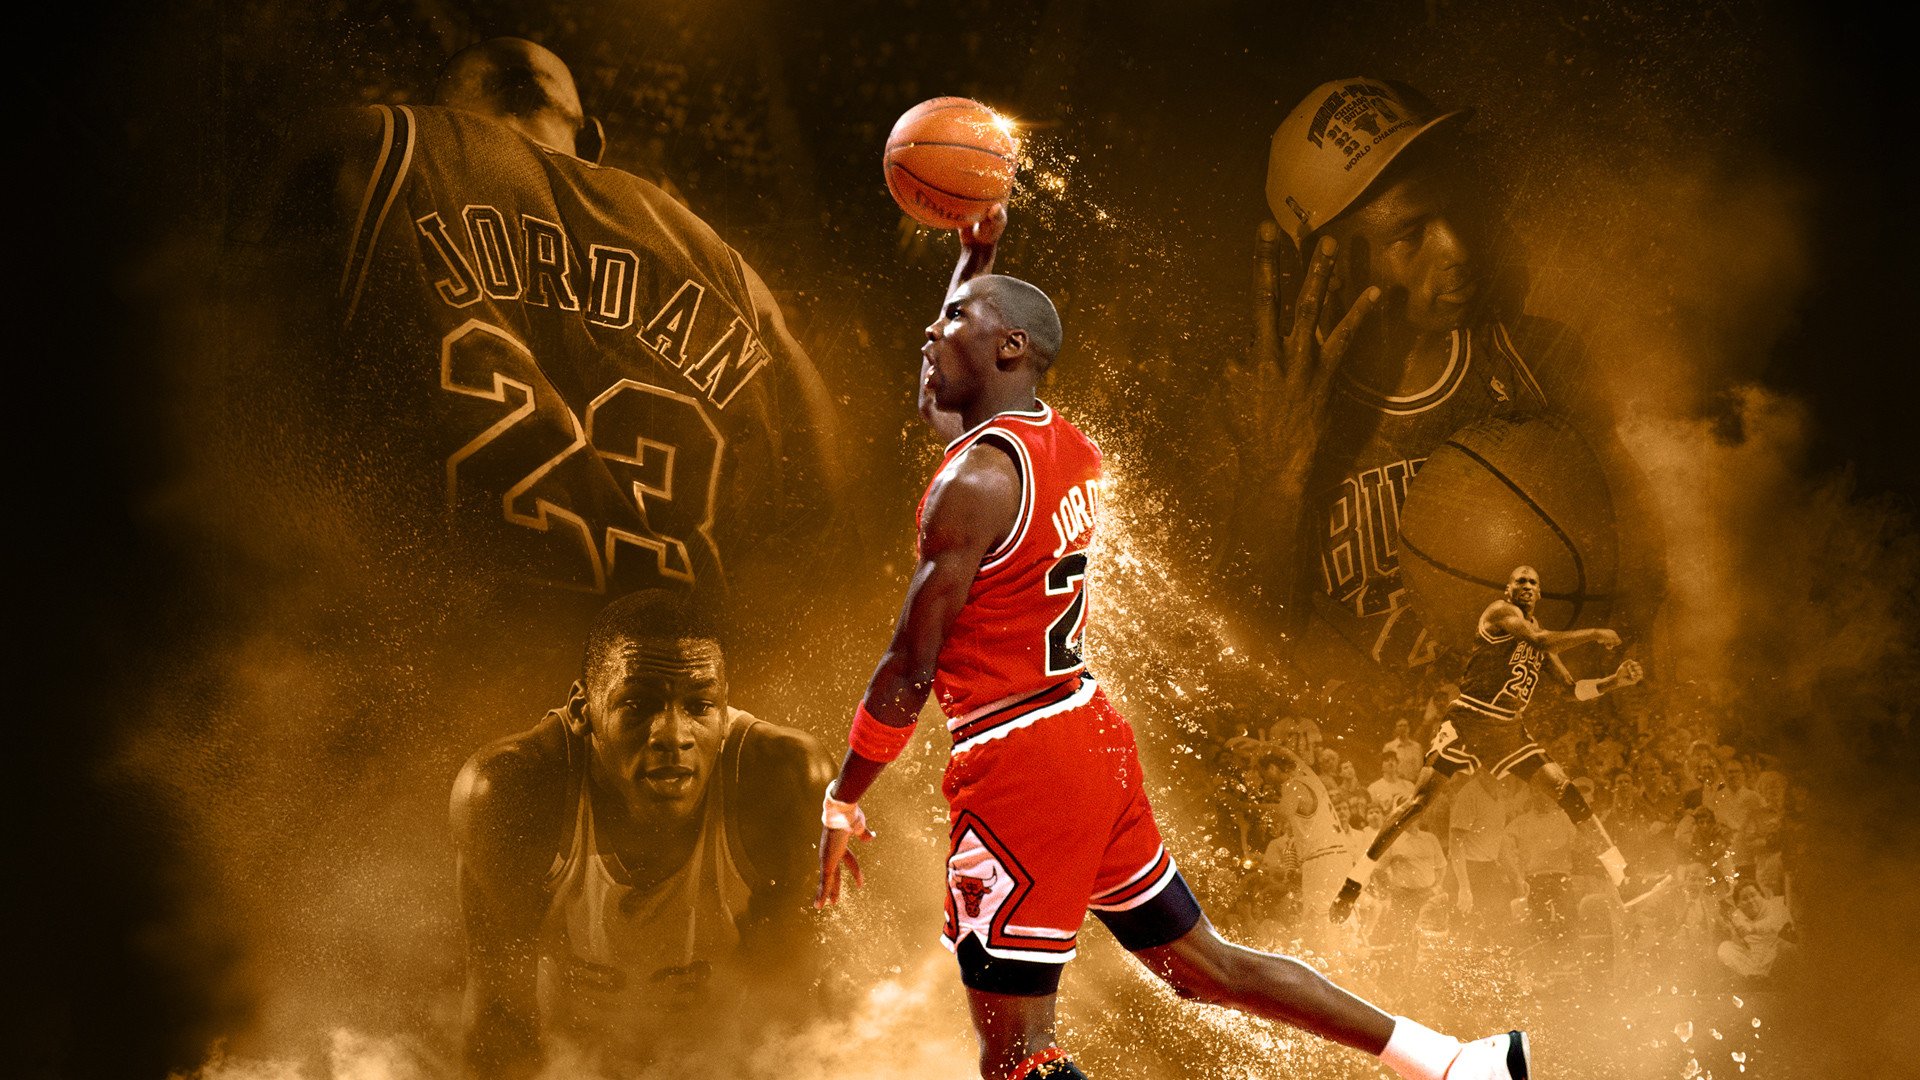 1920x1080 Basketball NBA Wallpapers HD pictures images.